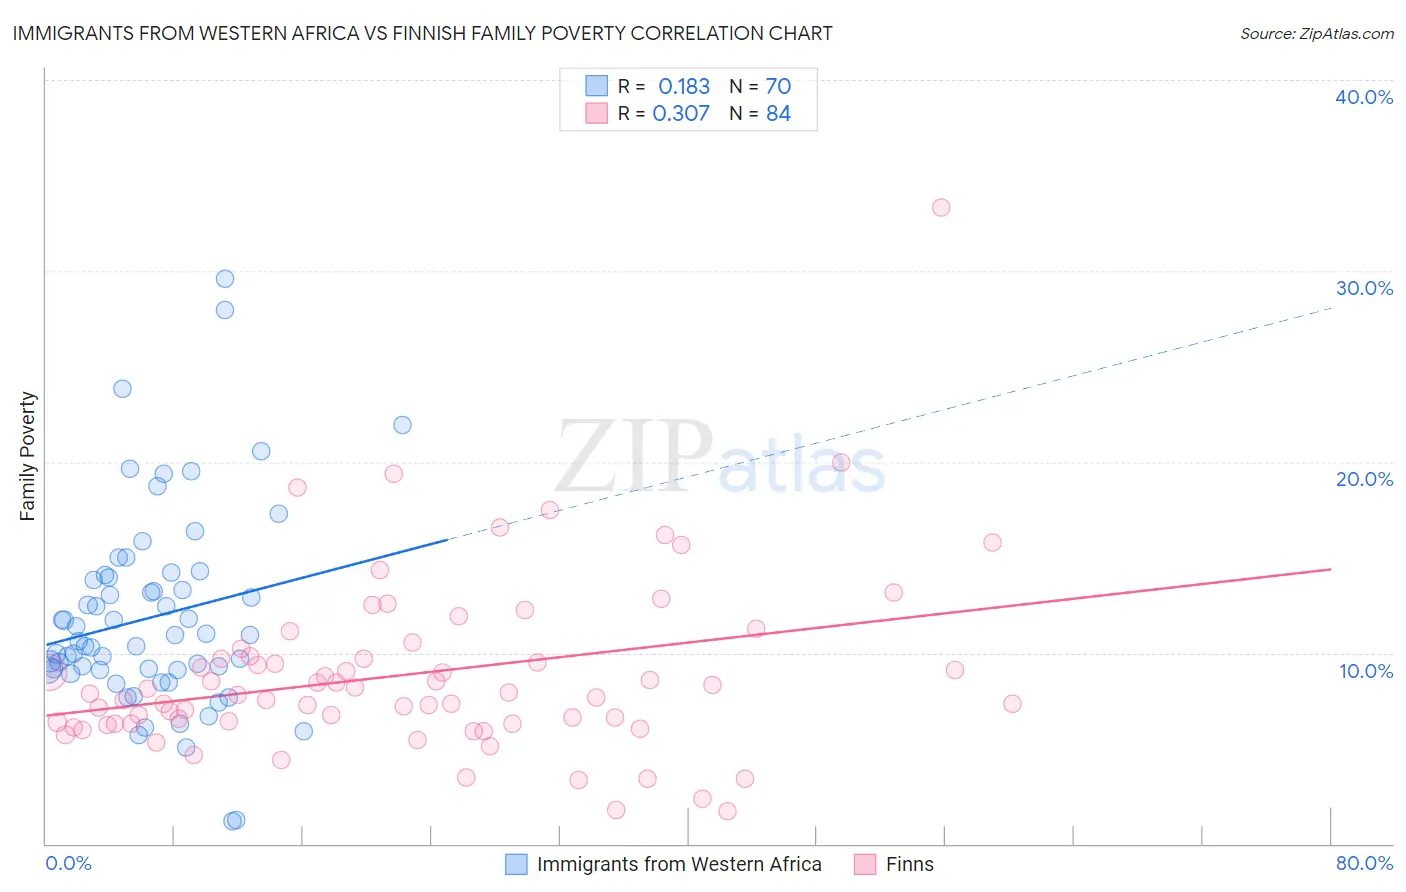 Immigrants from Western Africa vs Finnish Family Poverty